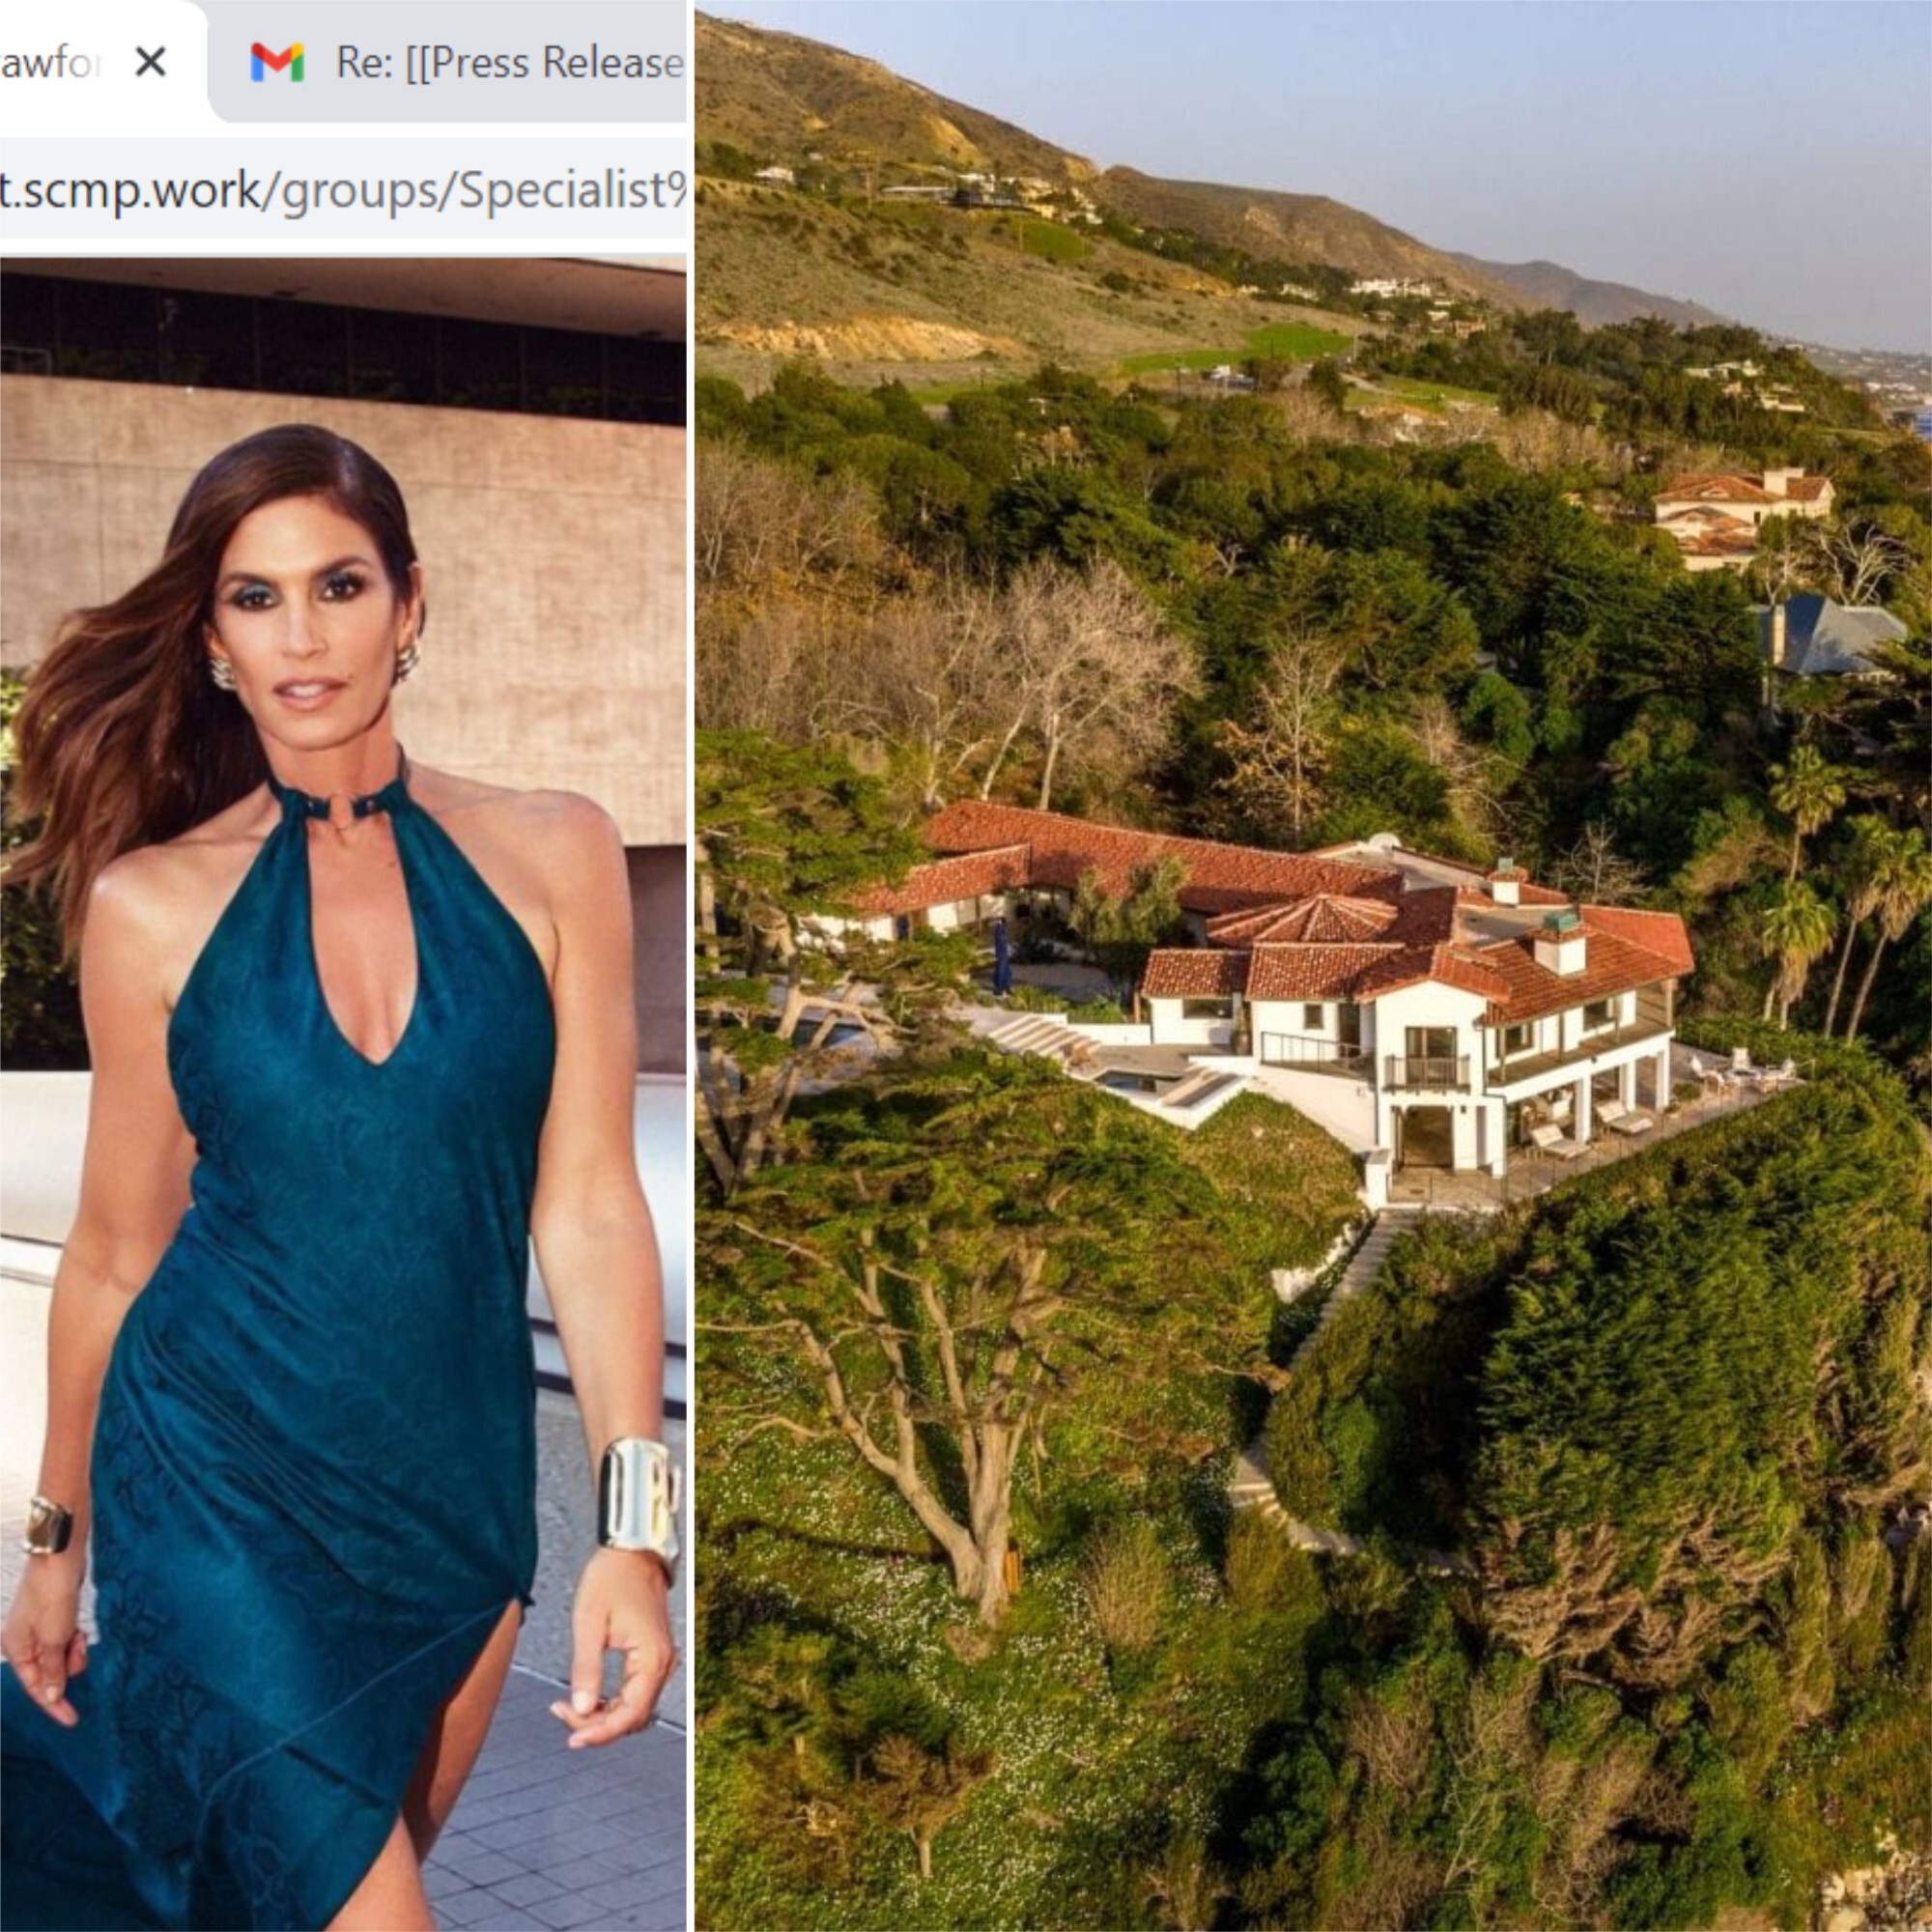 Cindy Crawford’s former Malibu mansion is on the market for US$99.5 million, making it one of the most expensive in the entire state. Photos: @cindycrawford/Instagram; Coldwell Banker Realty